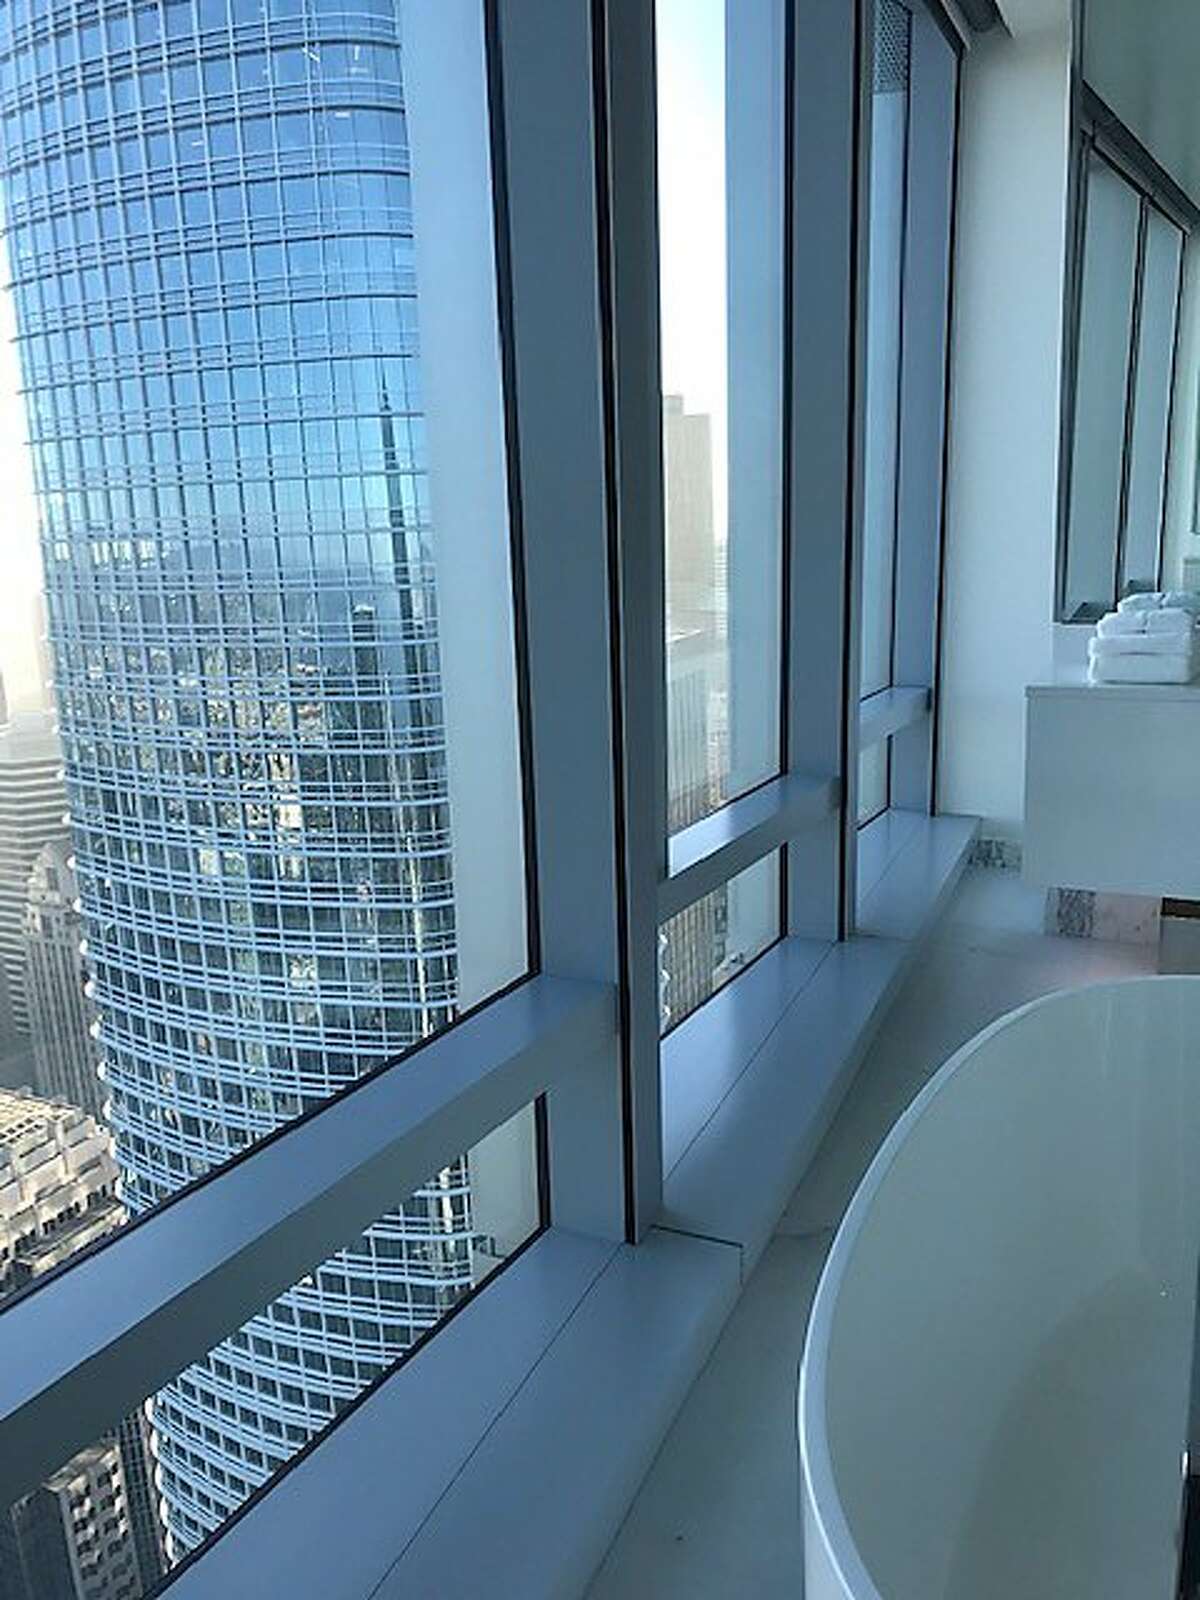 Looking out from the 181 Fremont bathtub� to the Salesforce Tower